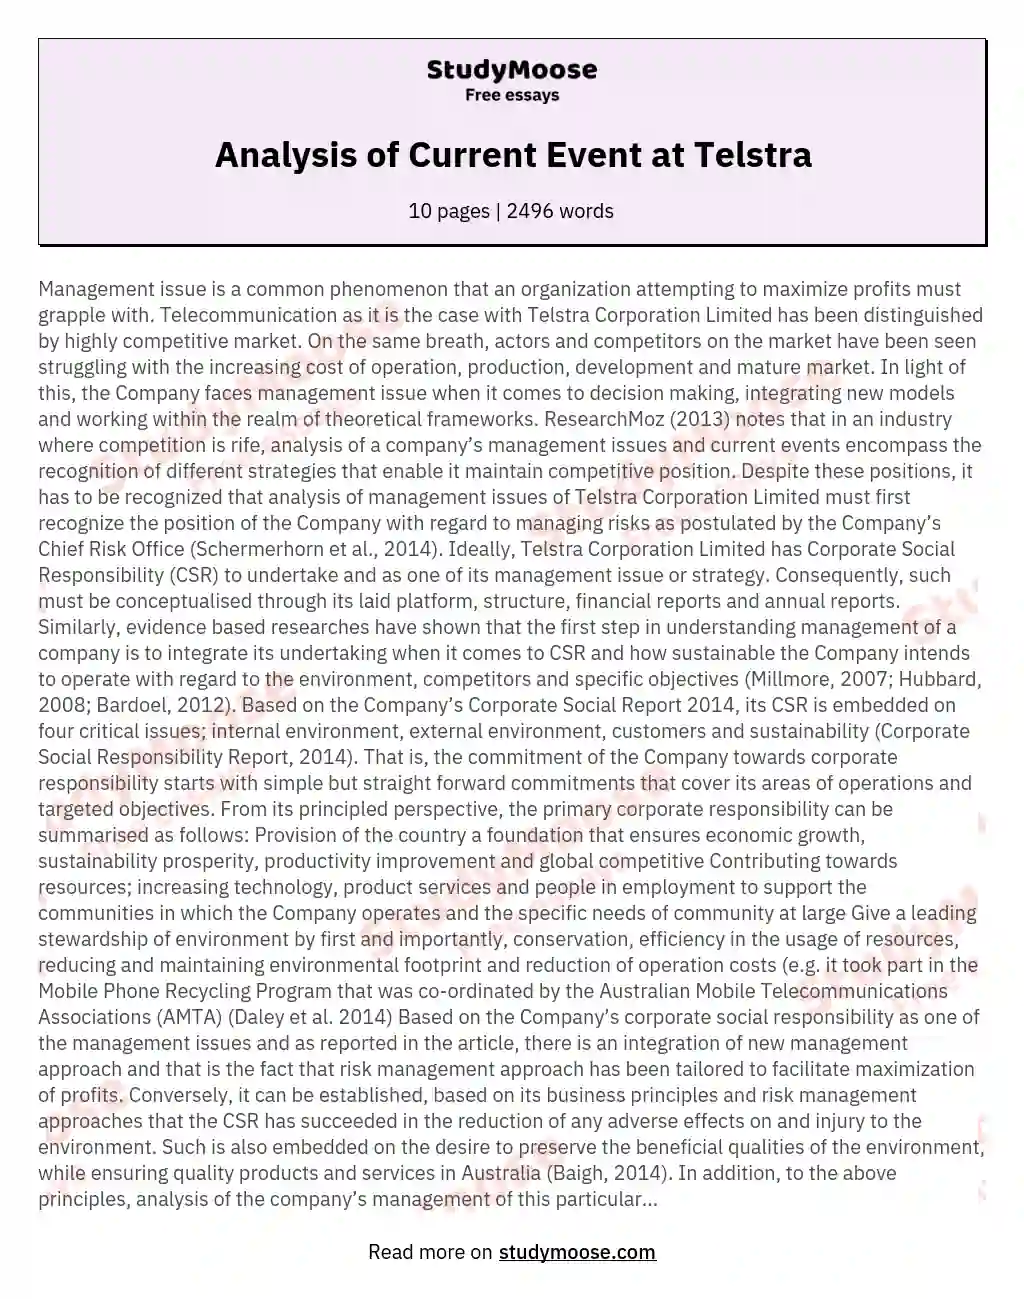 Analysis of Current Event at Telstra essay